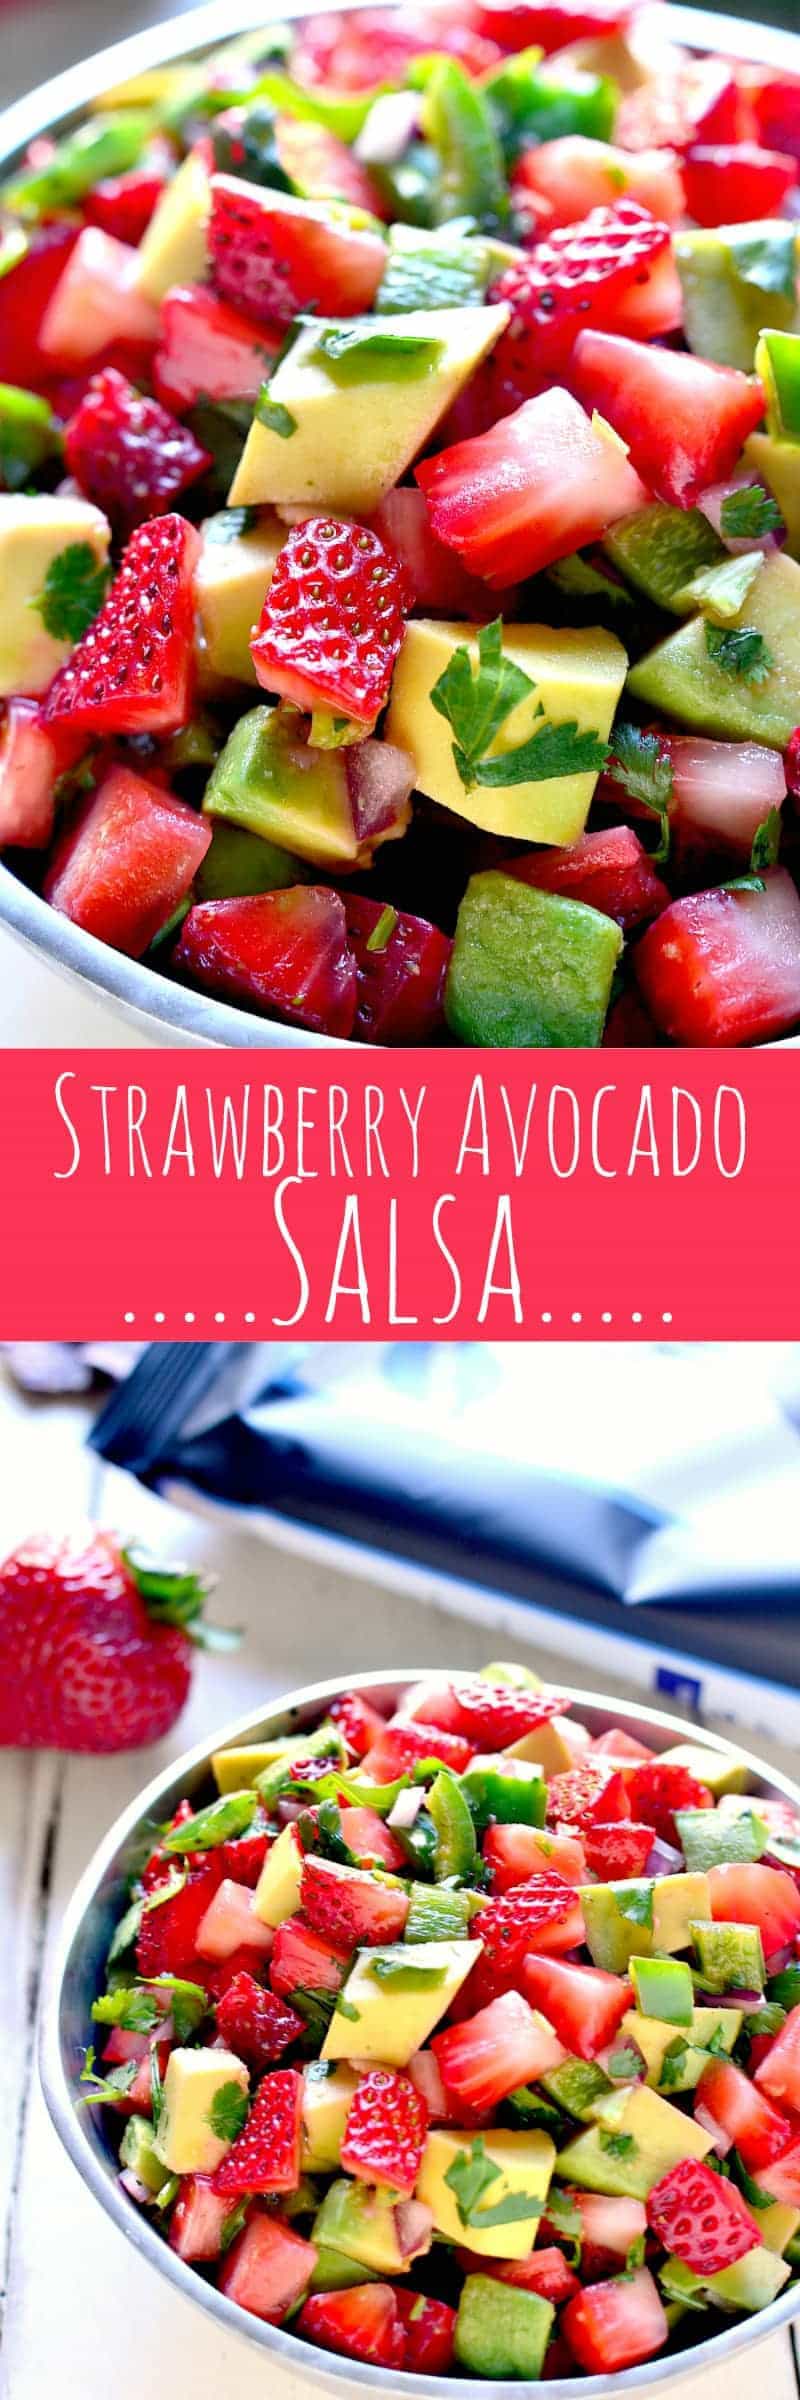 This Strawberry Avocado Salsa is a delicious twist on a favorite! Loaded with fresh strawberries, avocado, jalapeño, and cilantro, it's the perfect summer appetizer! 